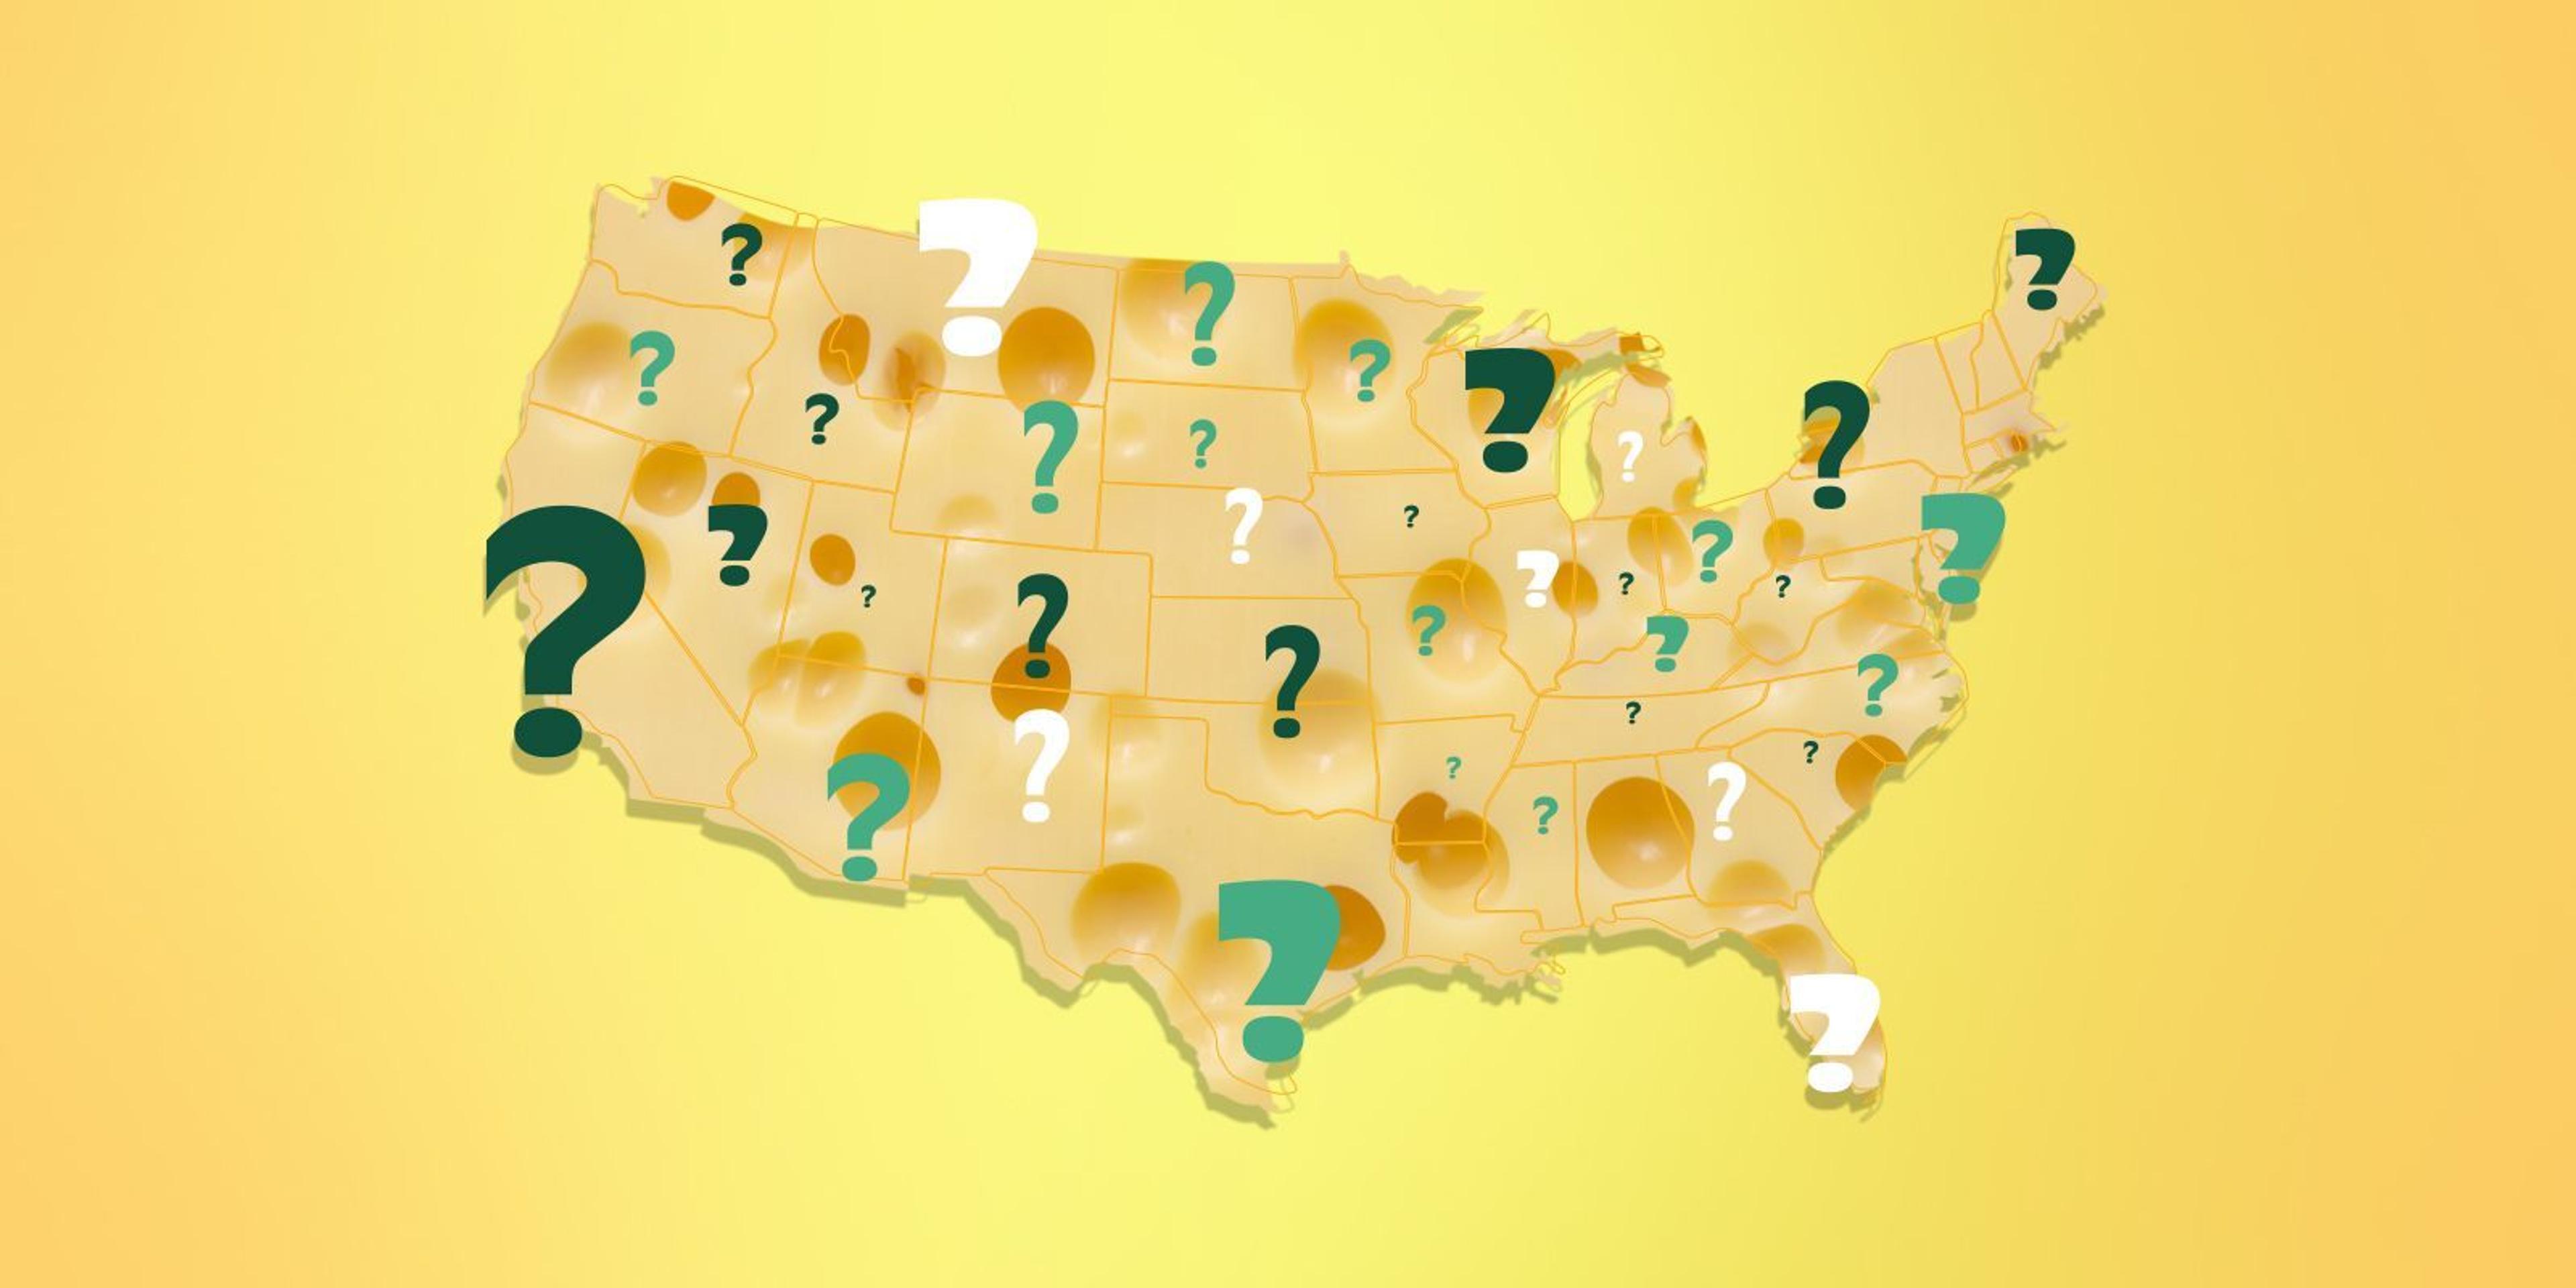 Graphic of the United States with question marks in the states.